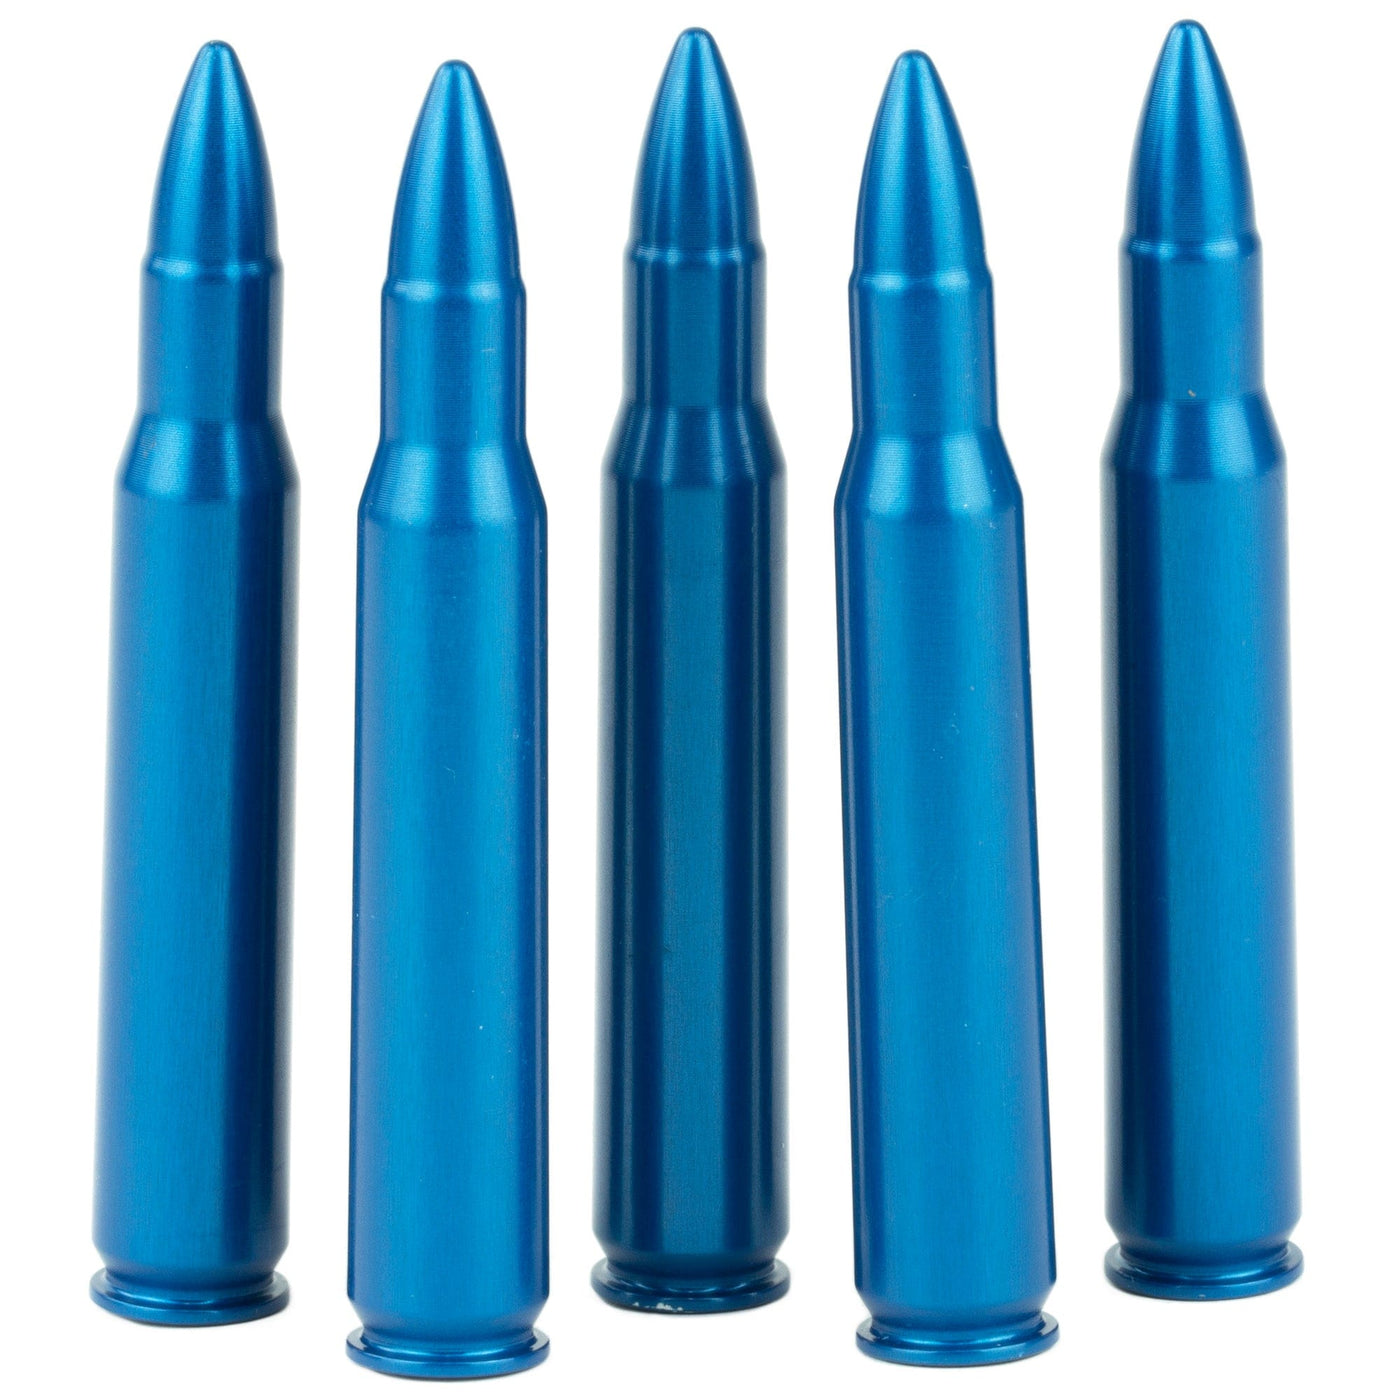 A-Zoom A-zoom Metal Snap Cap Blue - .30-06 5-pack Ammo